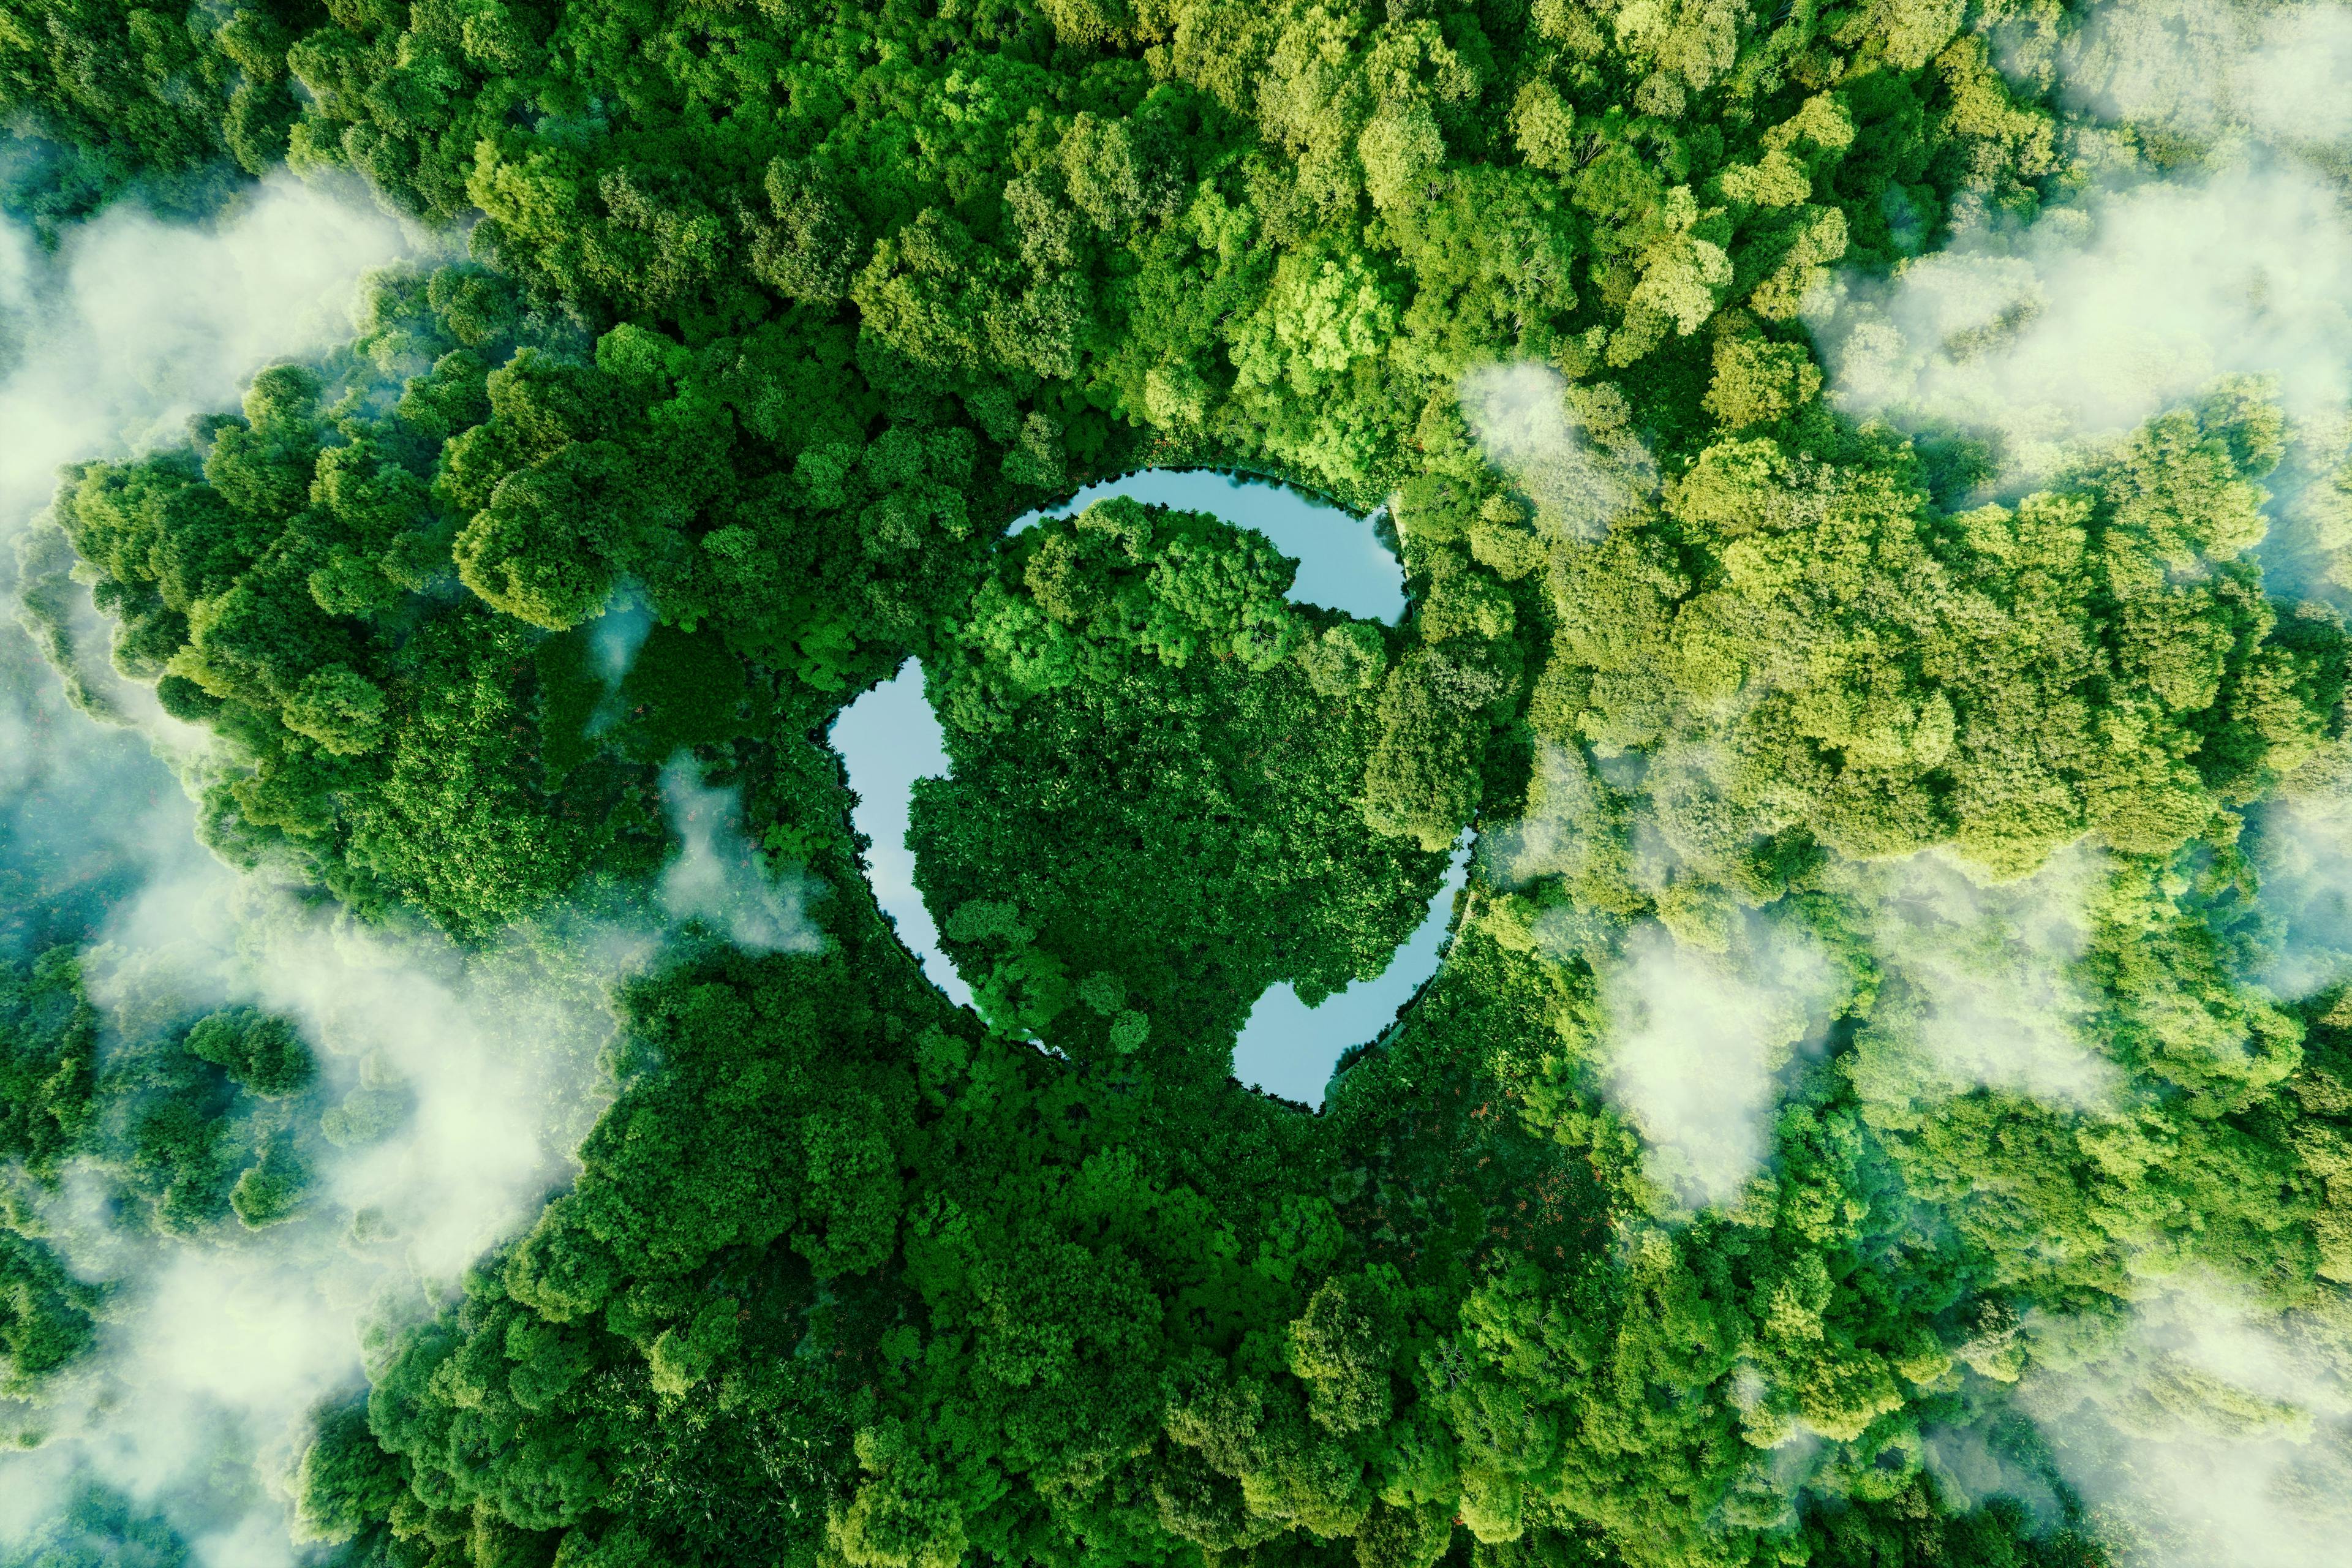 Abstract icon representing the ecological call to recycle and reuse in the form of a pond with a recycling symbol in the middle of a beautiful untouched jungle. 3d rendering. | Image Credit: © malp - stock.adobe.com